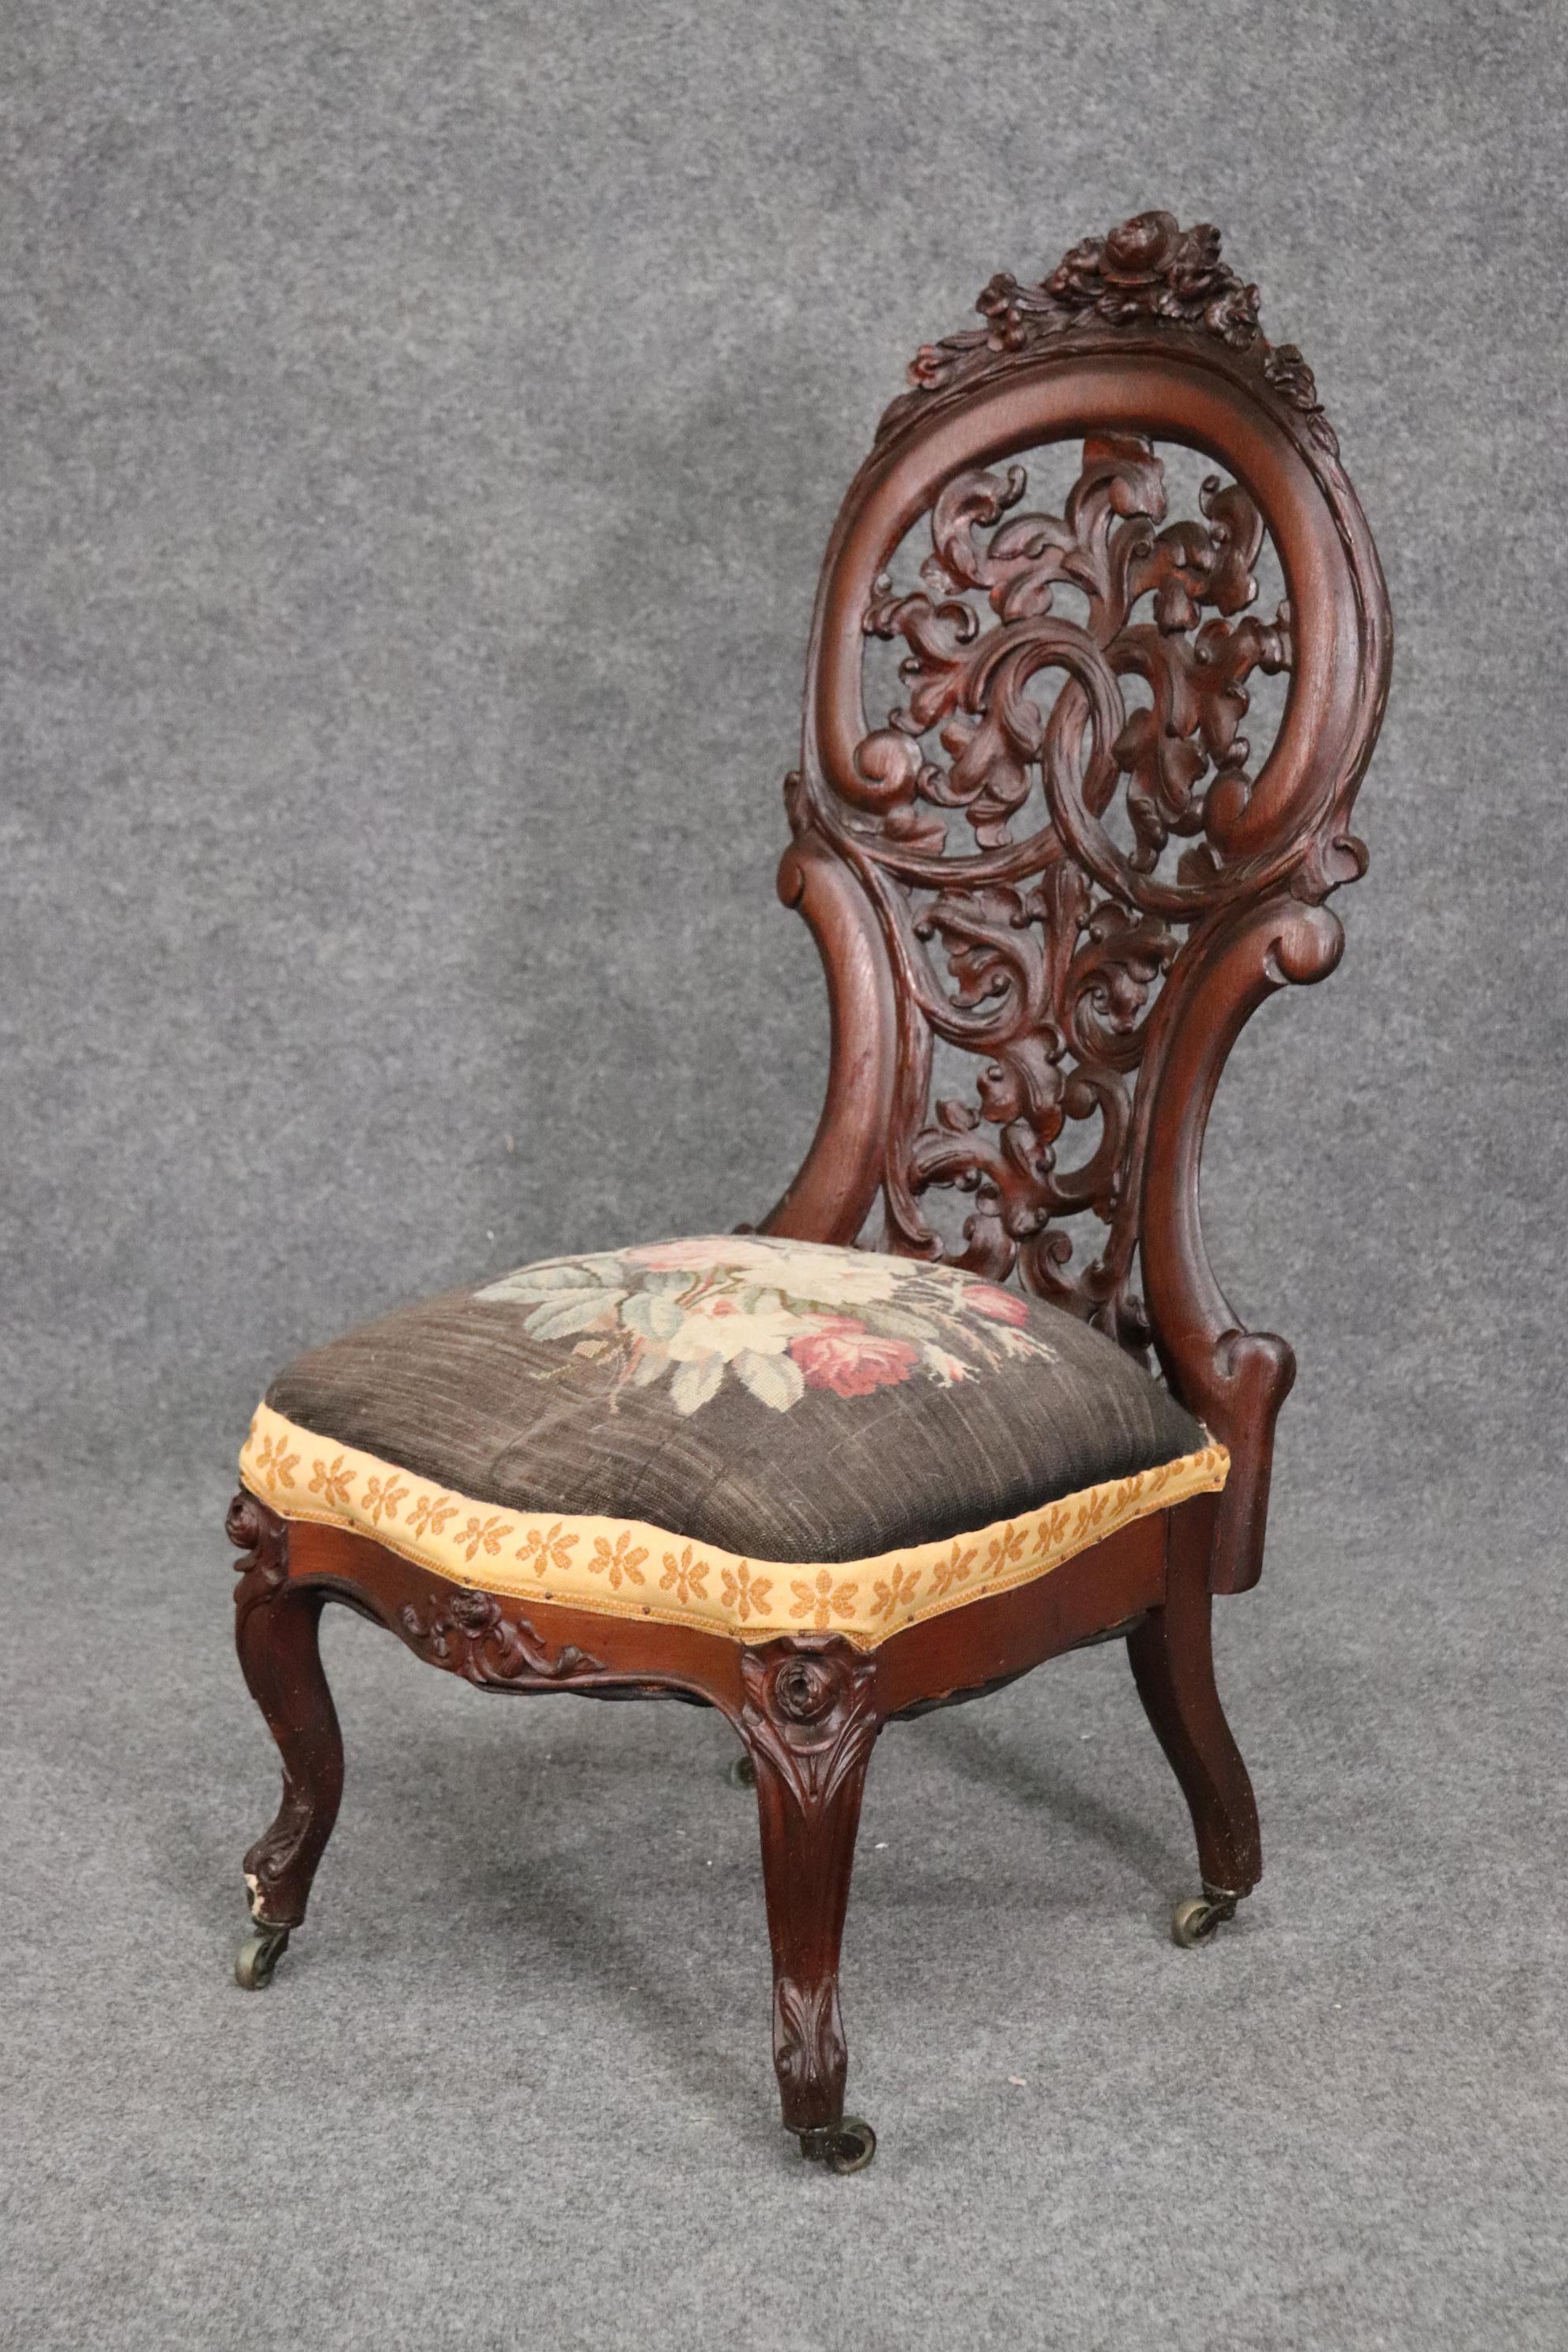 American Meeks or Belter Laminated Rosewood Side Chair Circa 1860s